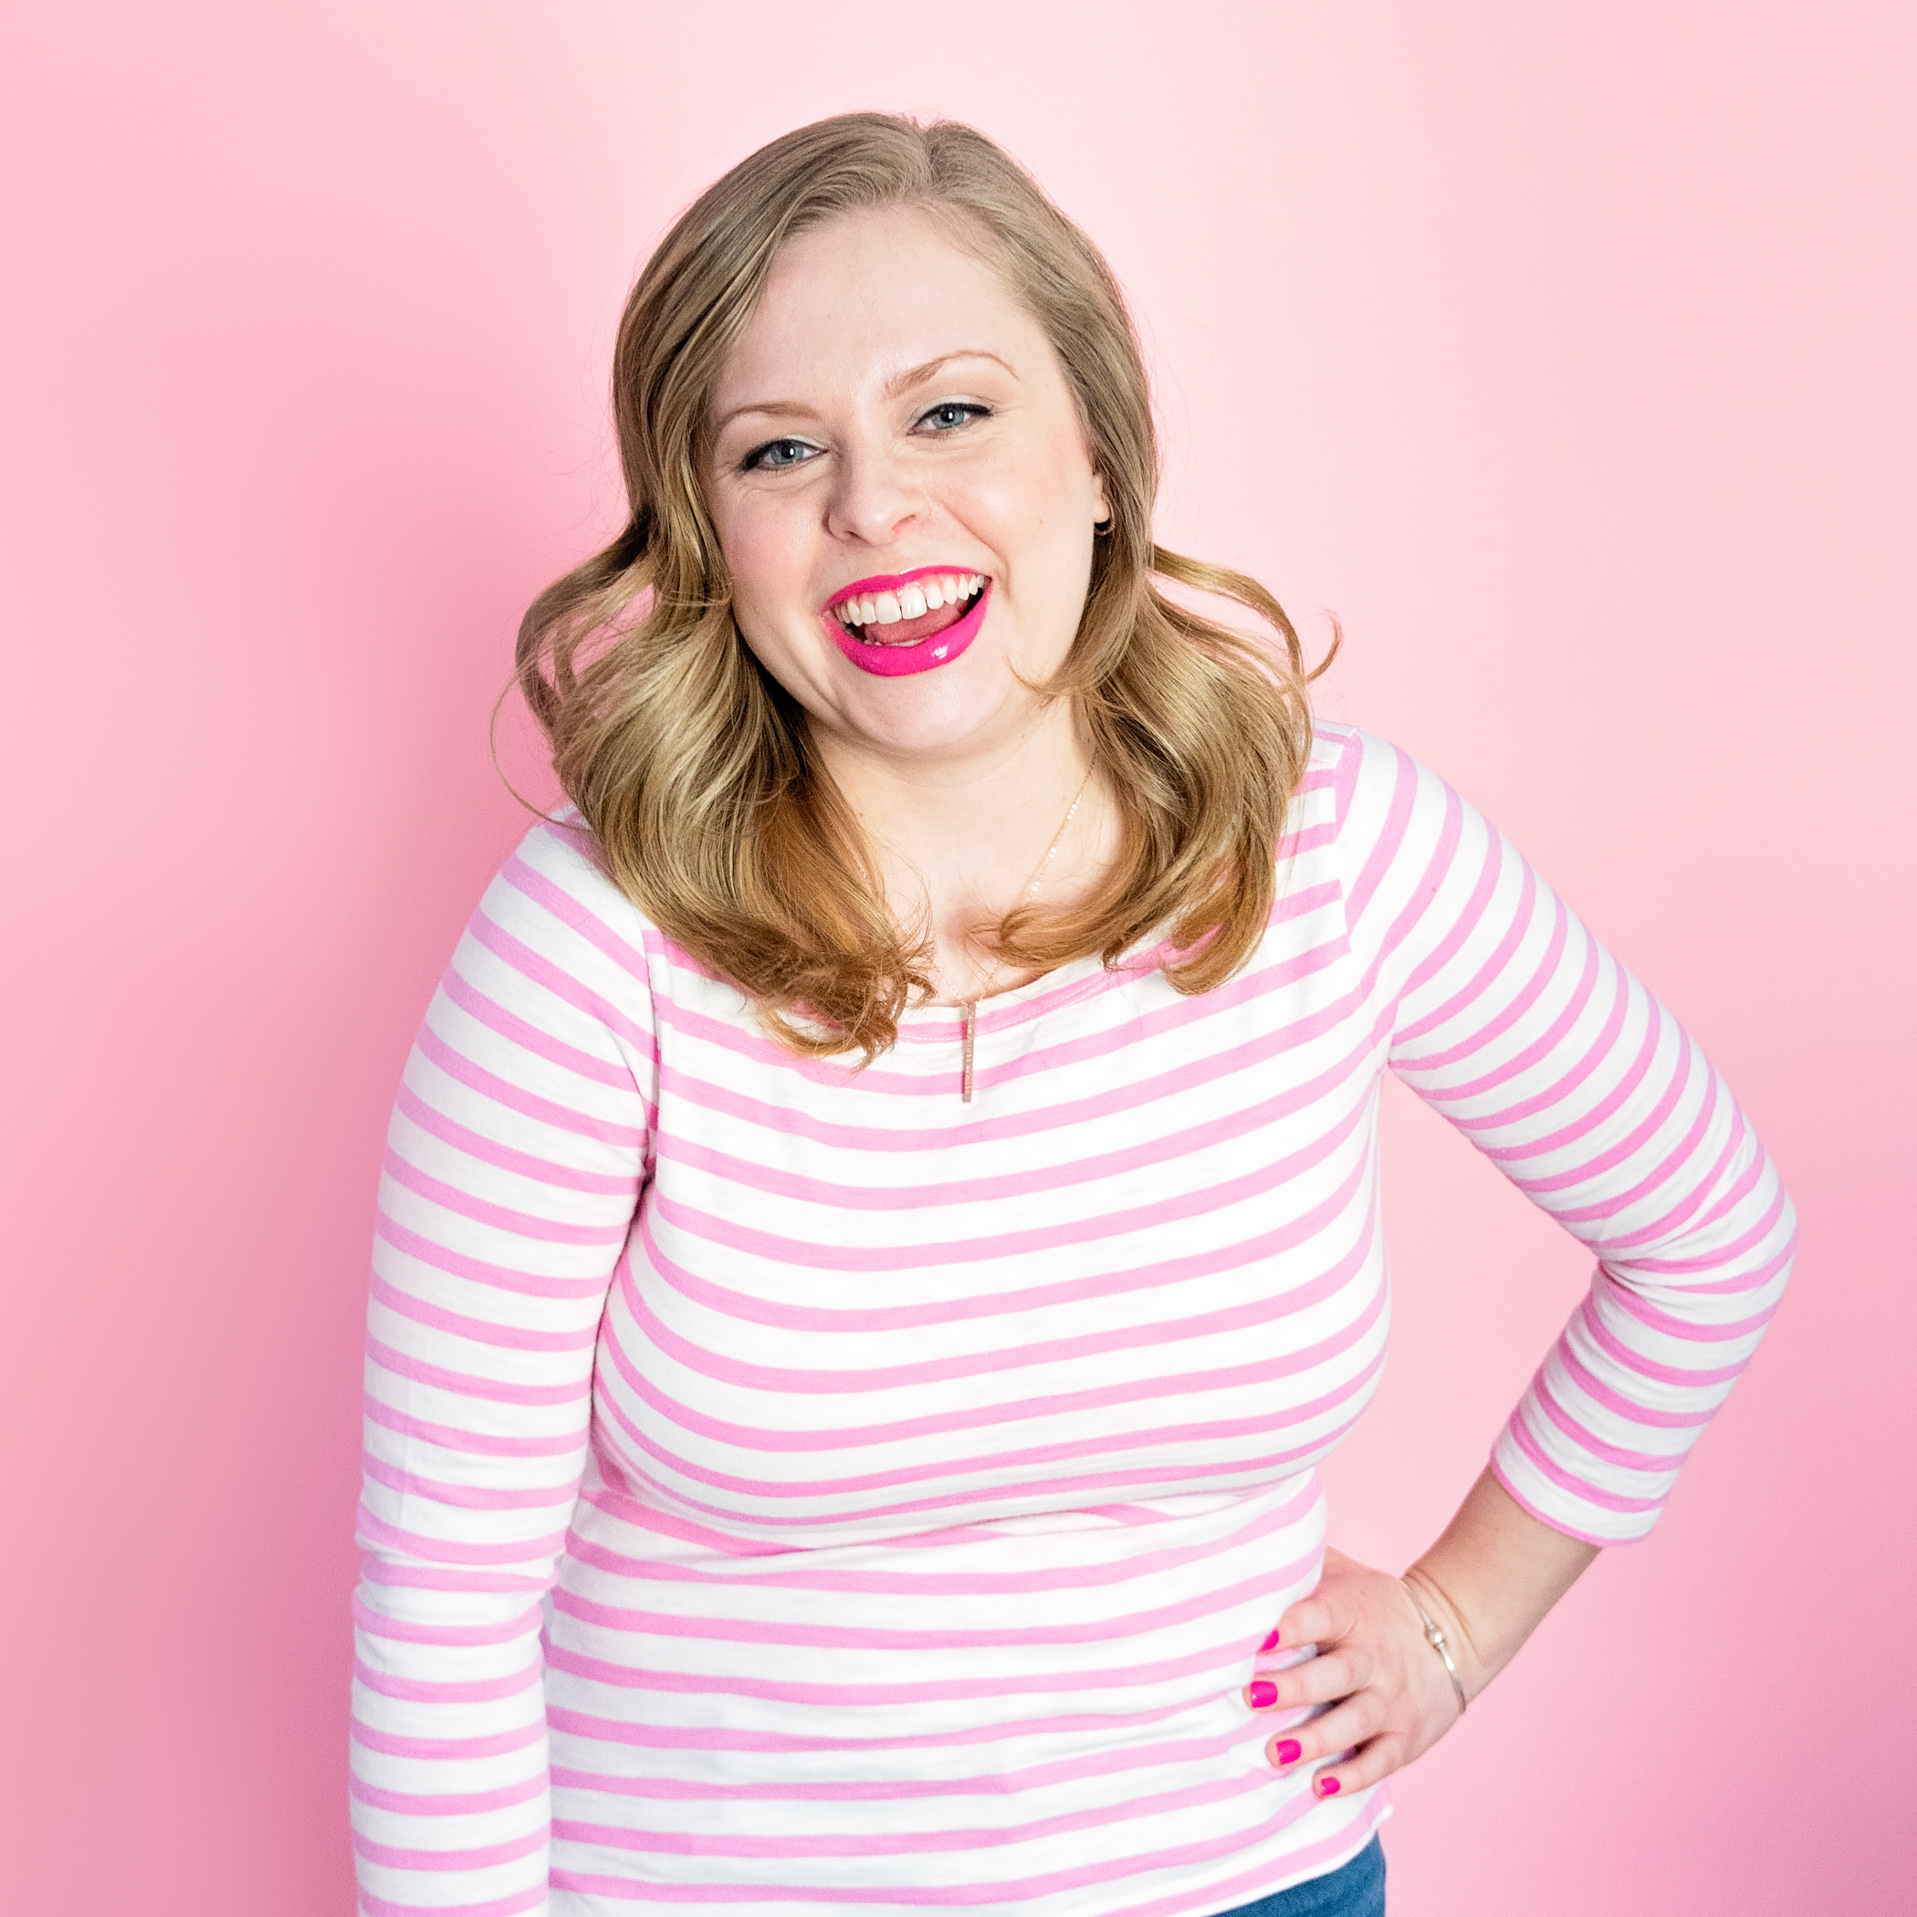 headshot of female entrepreneur on pink backdrop by jamie bannon photography.